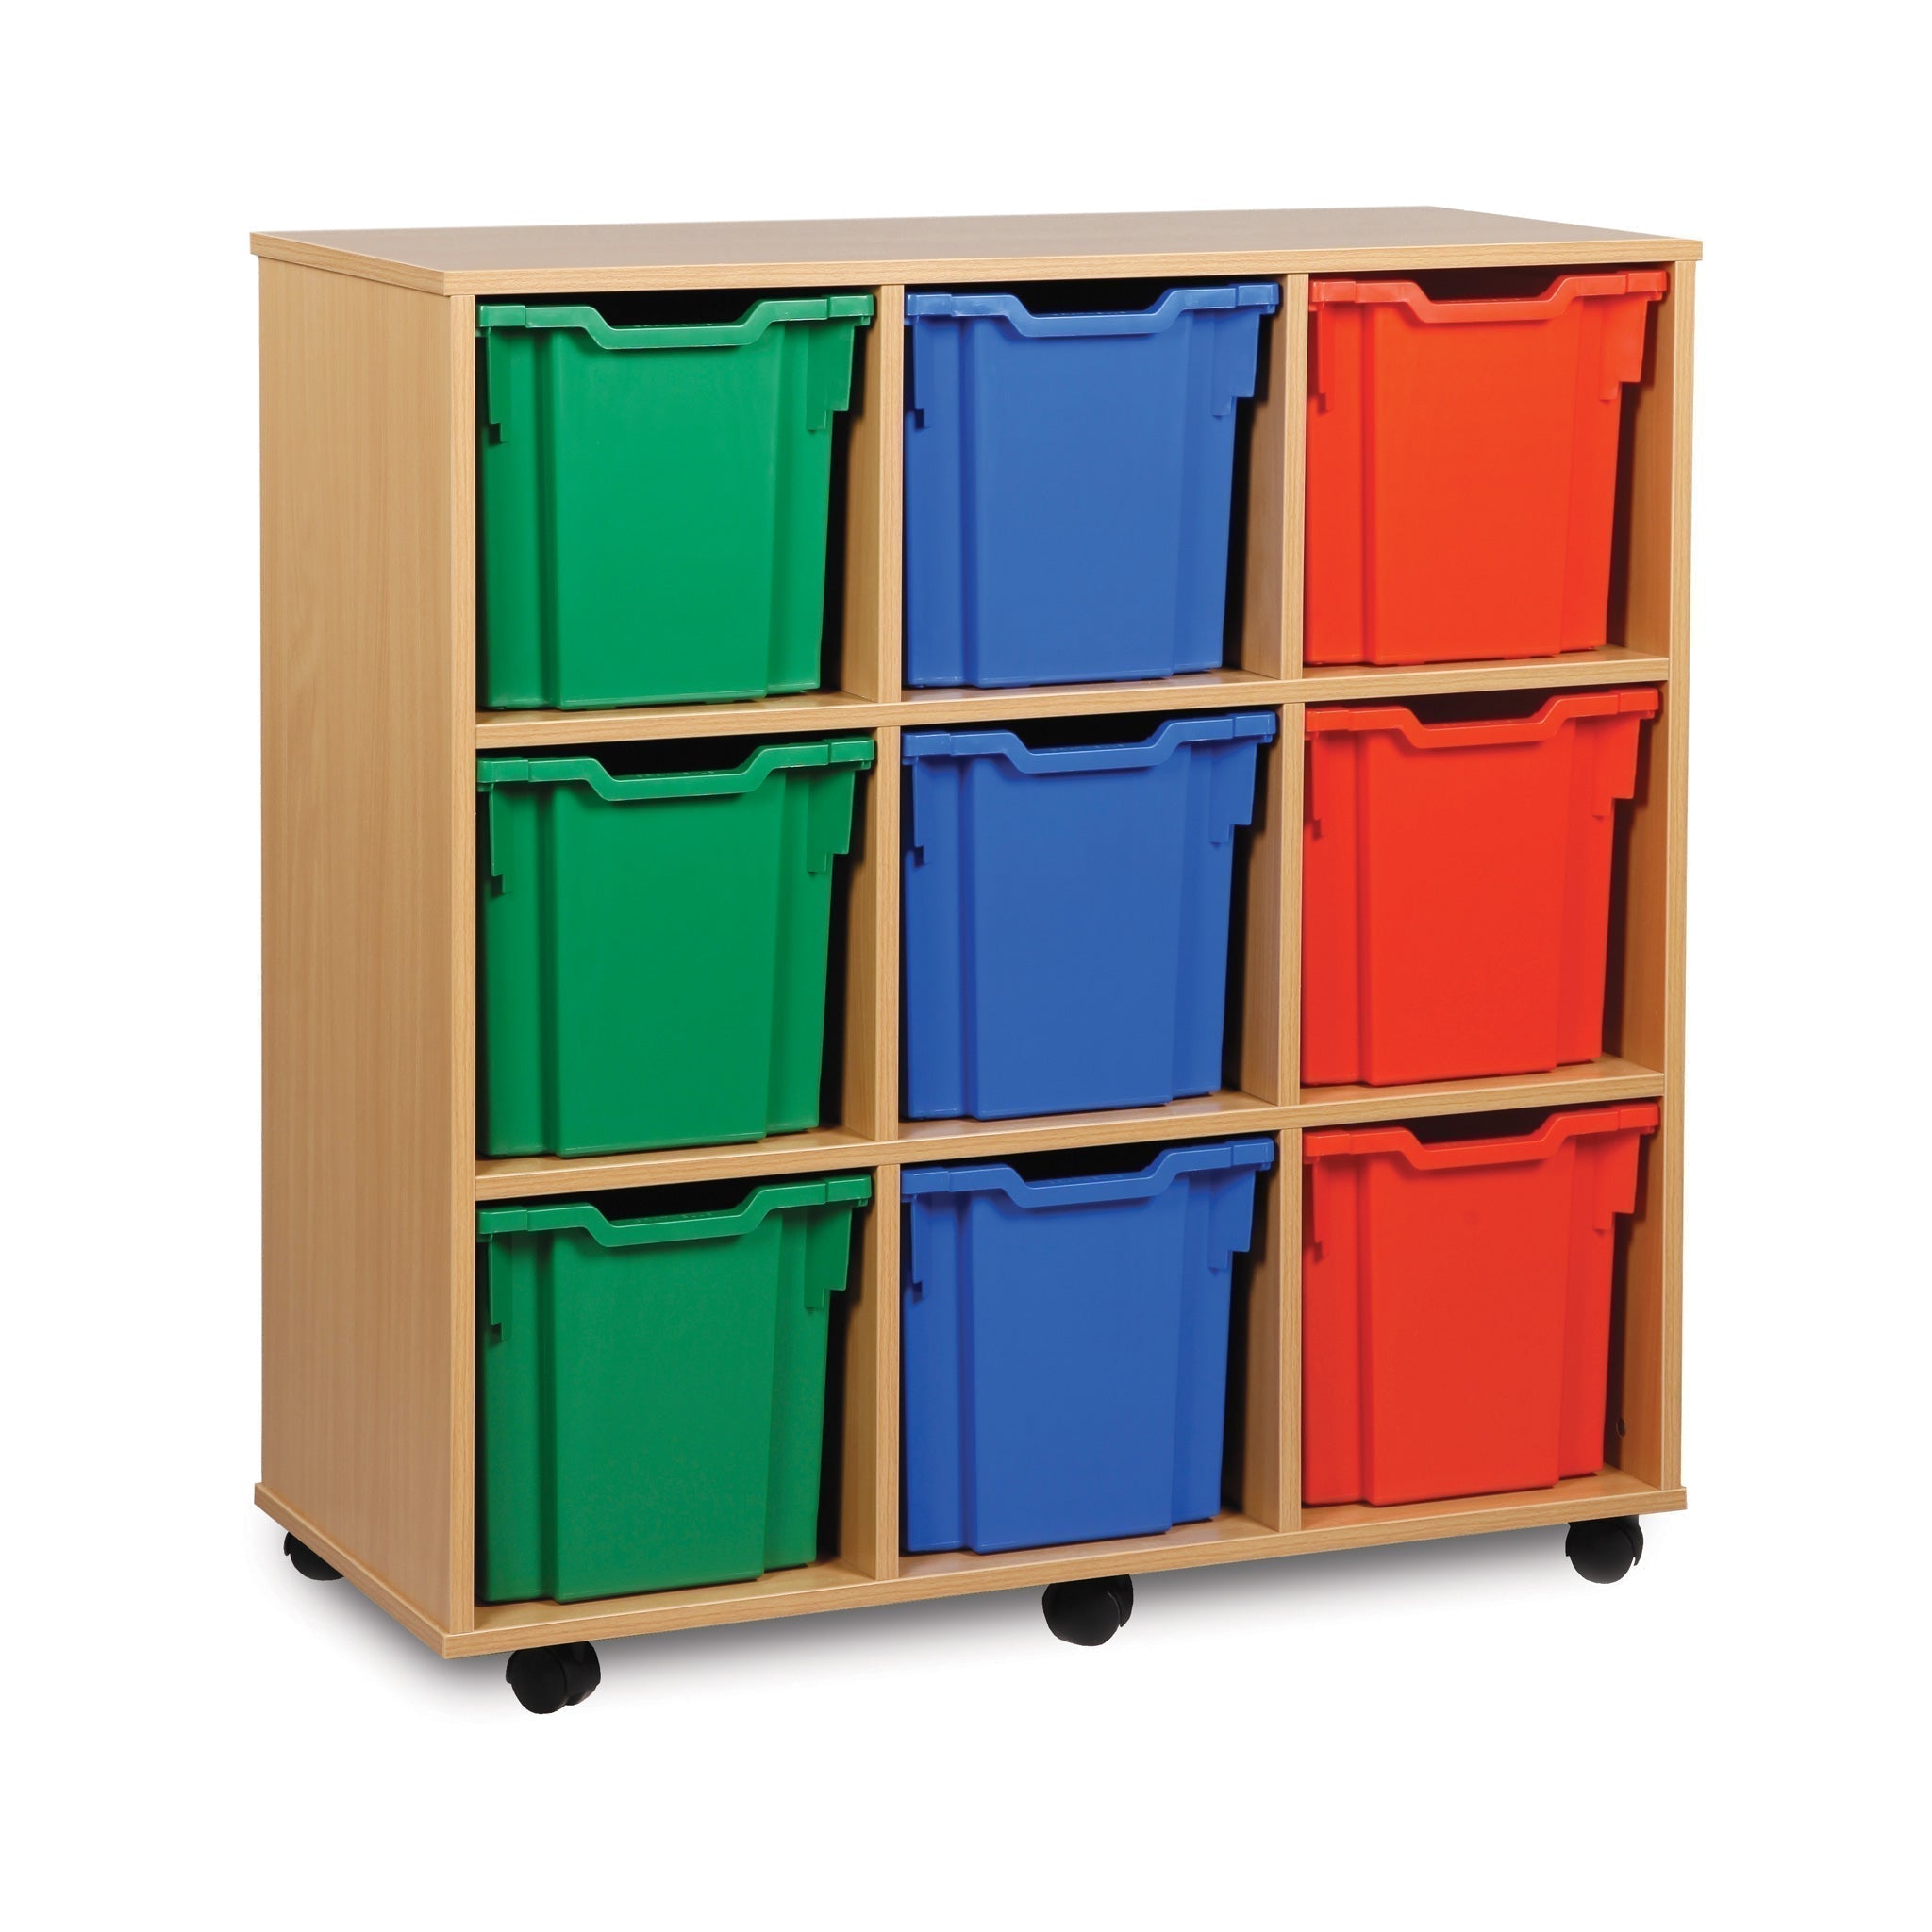 Monarch jumbo tray storage unit Storage unit, In a beech finish and made from sustainably sourced and FSC certified MFC, this unit will be sure to last all the trials of a classroom. Each storage unit is constructed using 18mm Egger MFC and fitted together by cam and dowel construction for extra rigidity and assured quality.These Monarch shallow tray units are supplied with strong non-marking shatterproof nylon castors, two of which come with a locking facility. Each have a load capacity of 58kg's with a tw